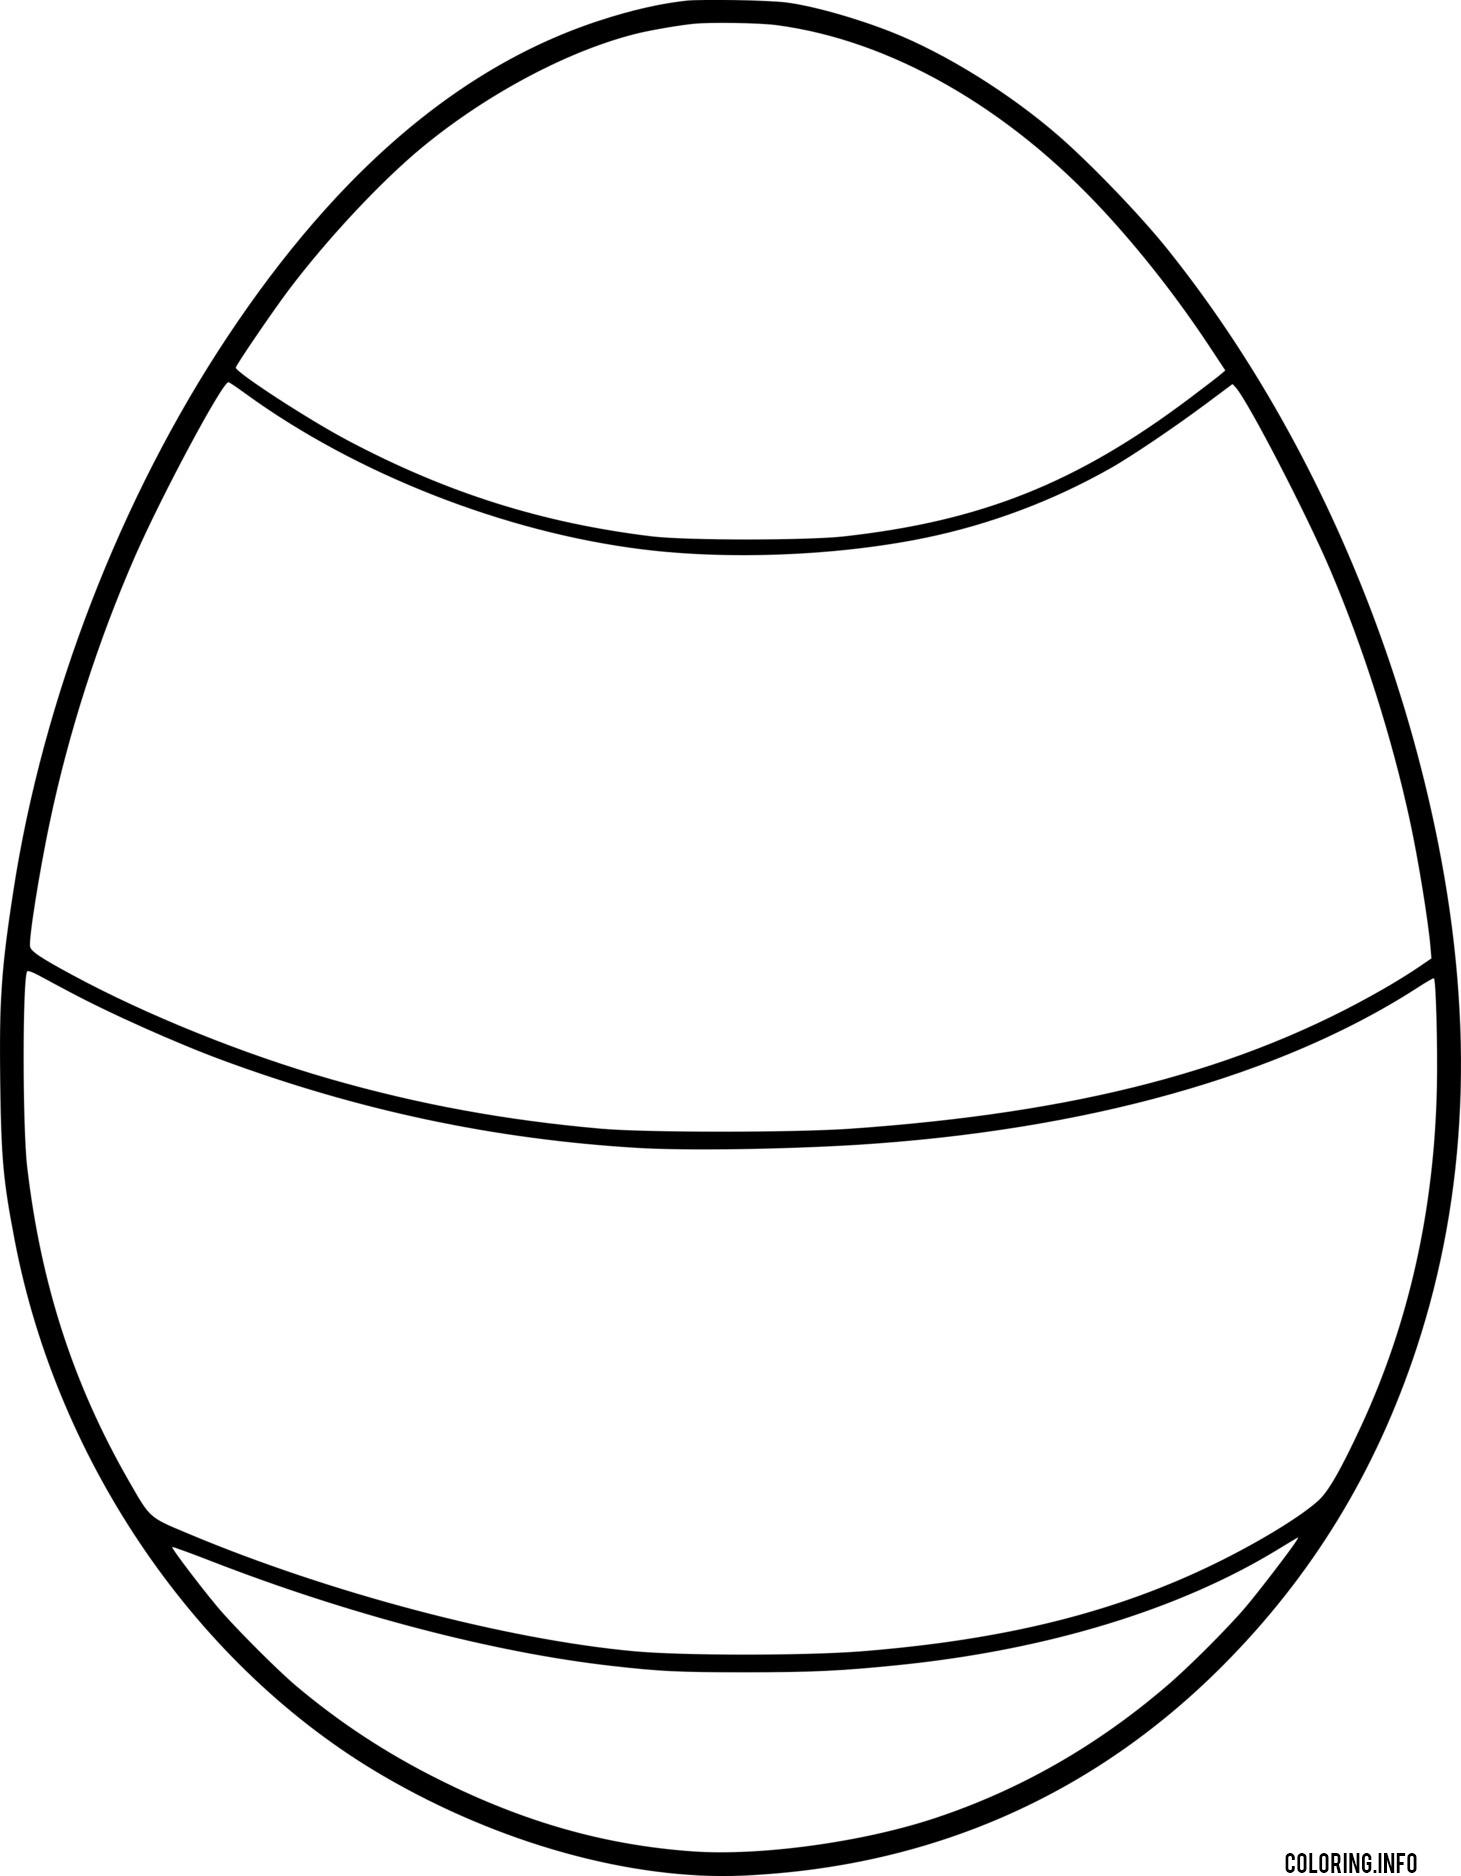 Easy Easter Egg coloring